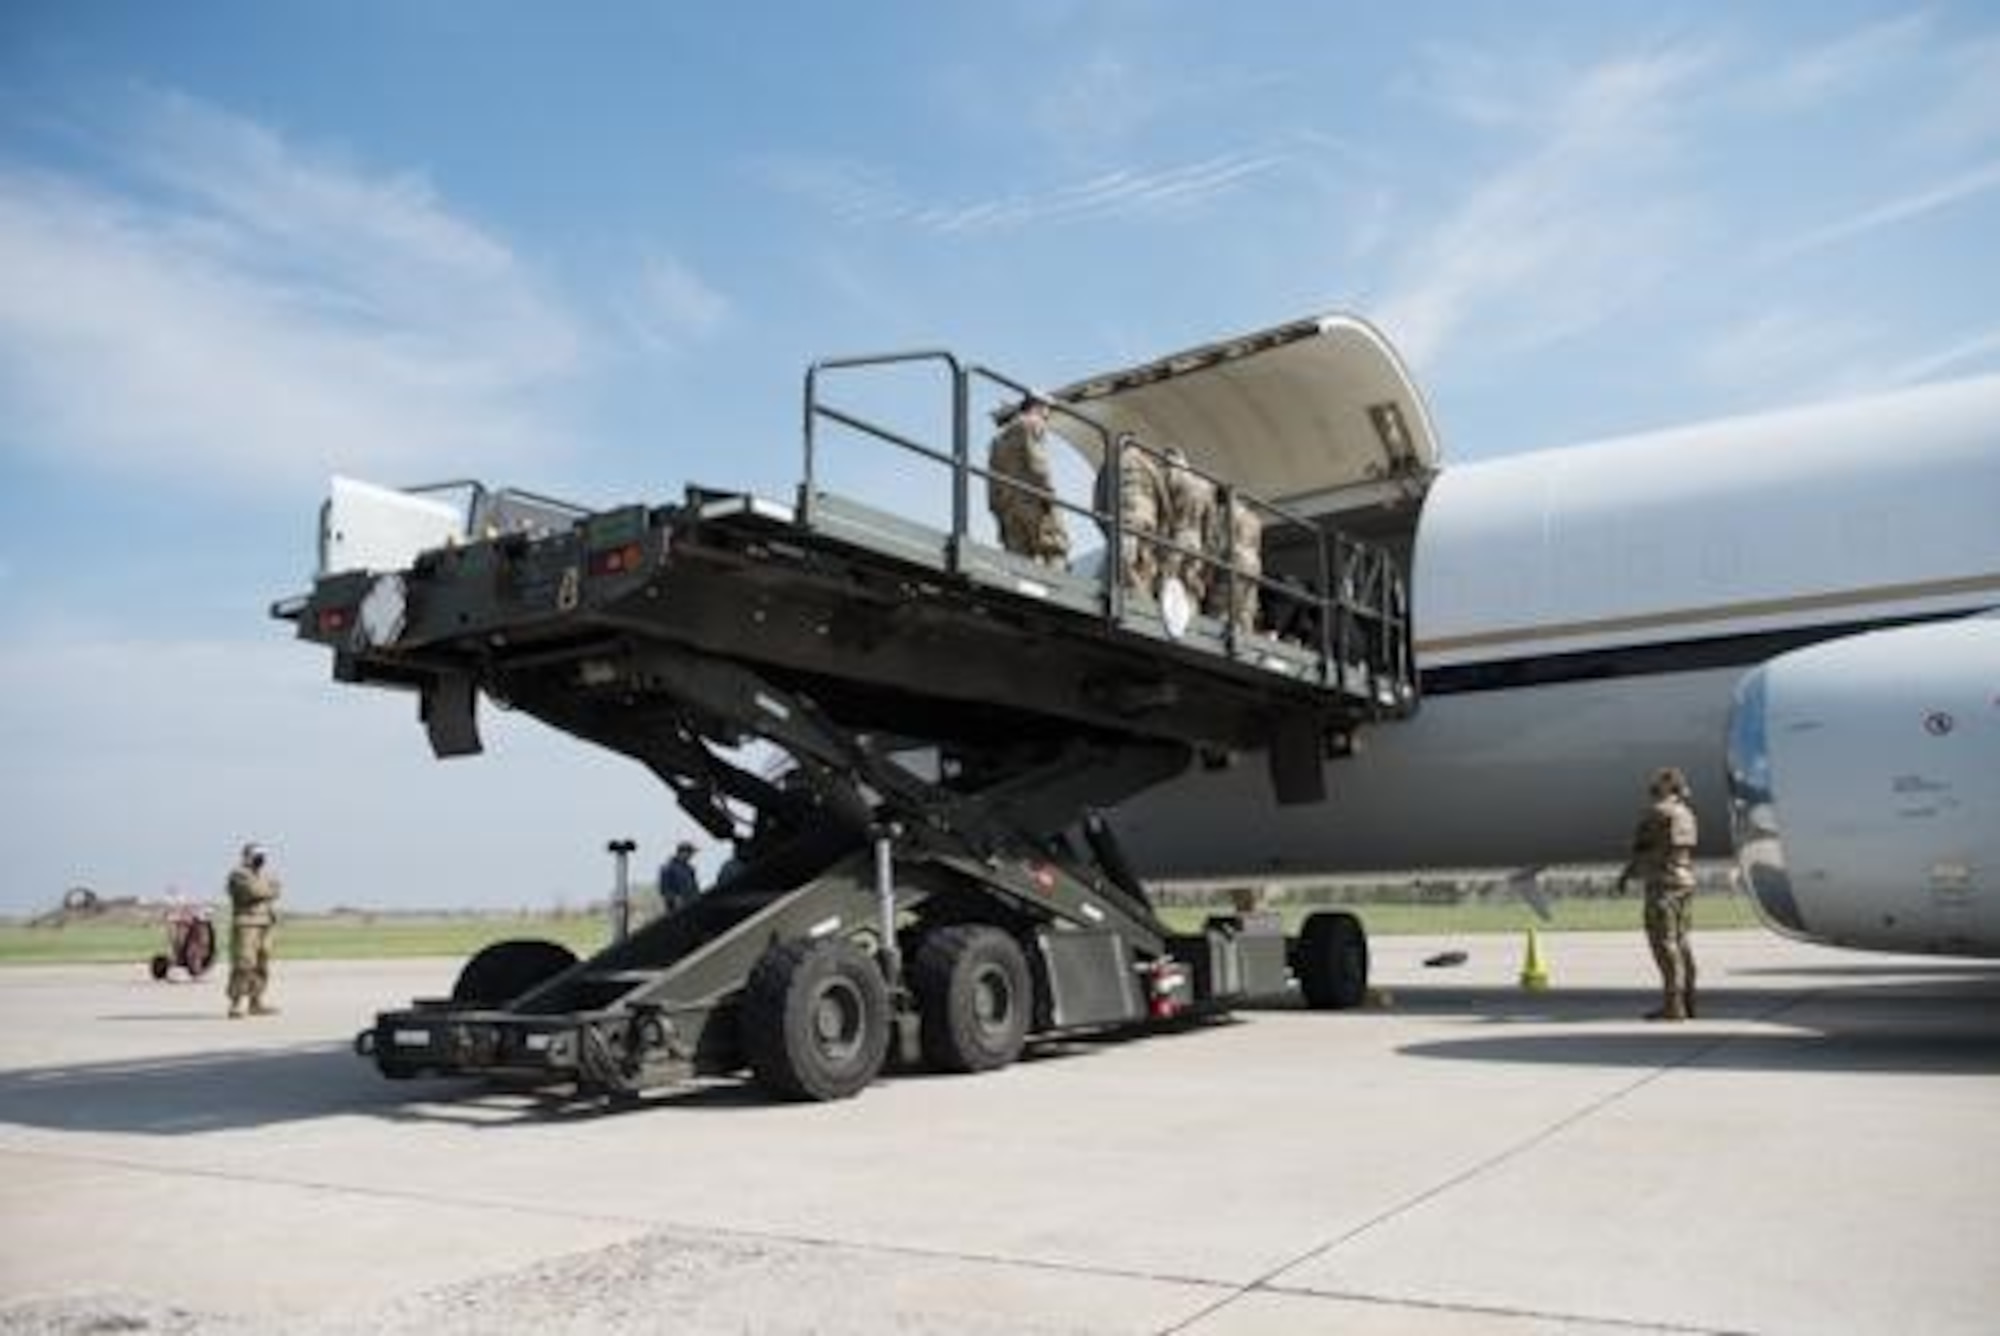 An Airman from the 5th Logistics Readiness Squadron hauls cargo at Minot Air Force Base, North Dakota, May 20, 2020. The 5th LRS modified pallets with rollers in order to efficiently change the way they work missions. (U.S. Air Force photo by Airmen 1st Class Jesse Jenny)